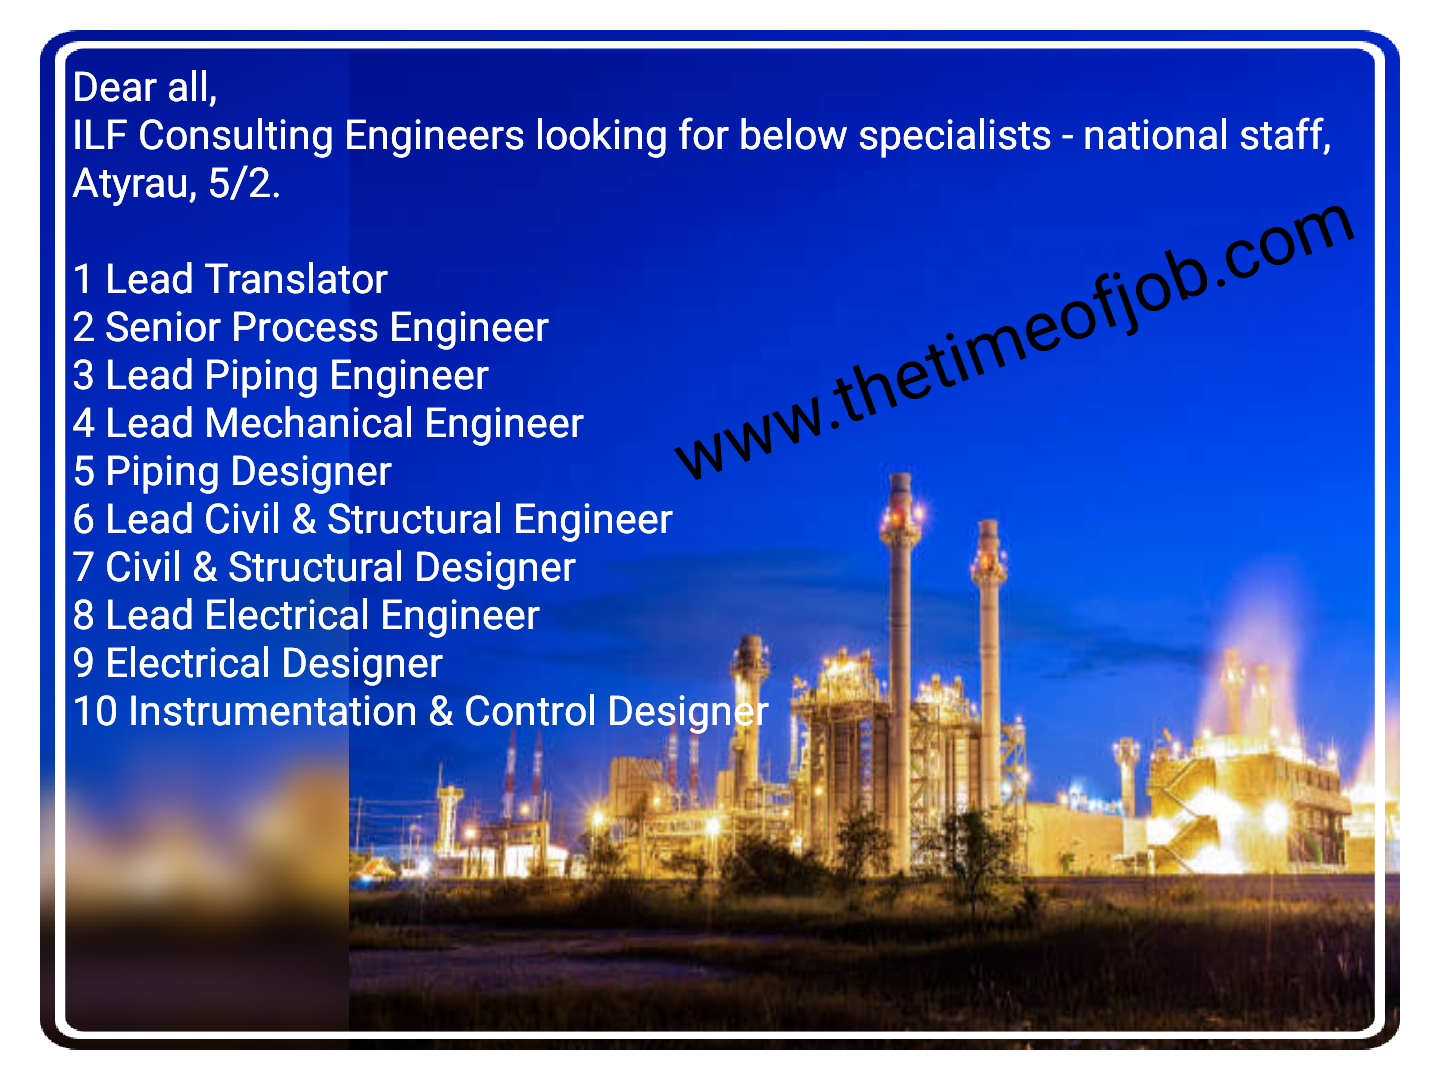 Process, Piping, Mechanical, Electrical, Instrument, Civil & Structural Senior & Lead Engineer Jobs